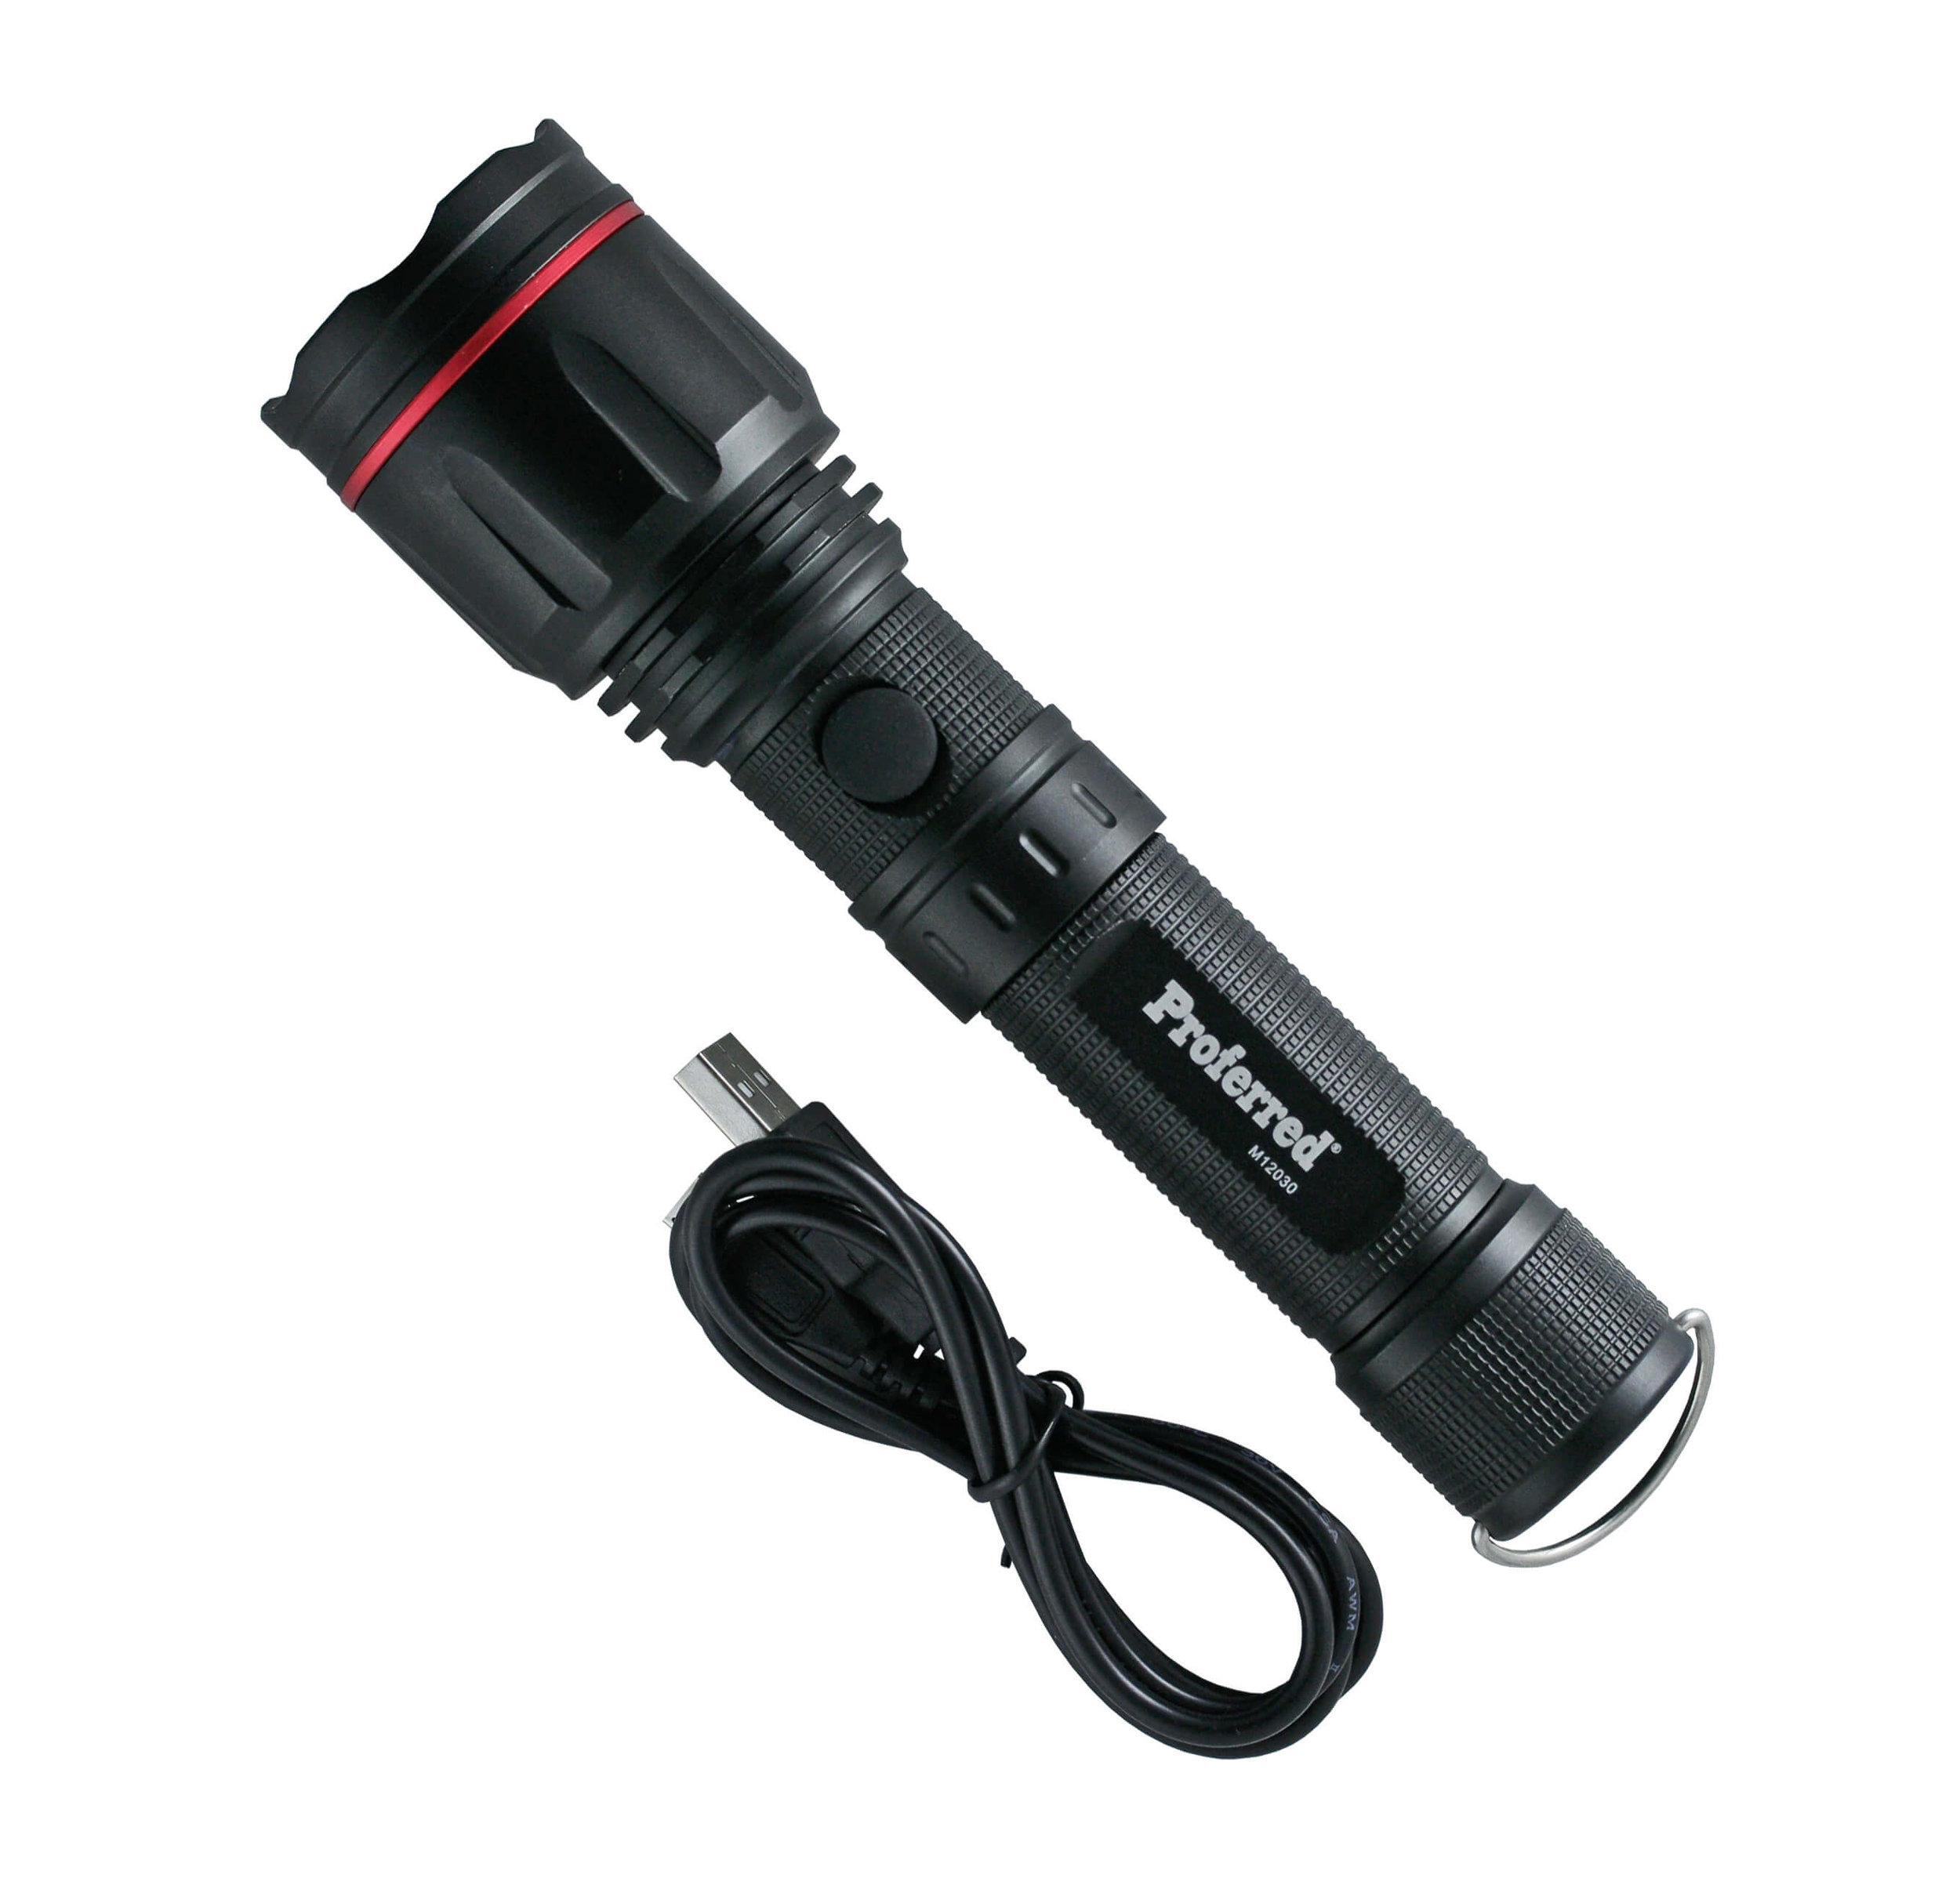 700 Lumen Rechargeable Battery (Included)